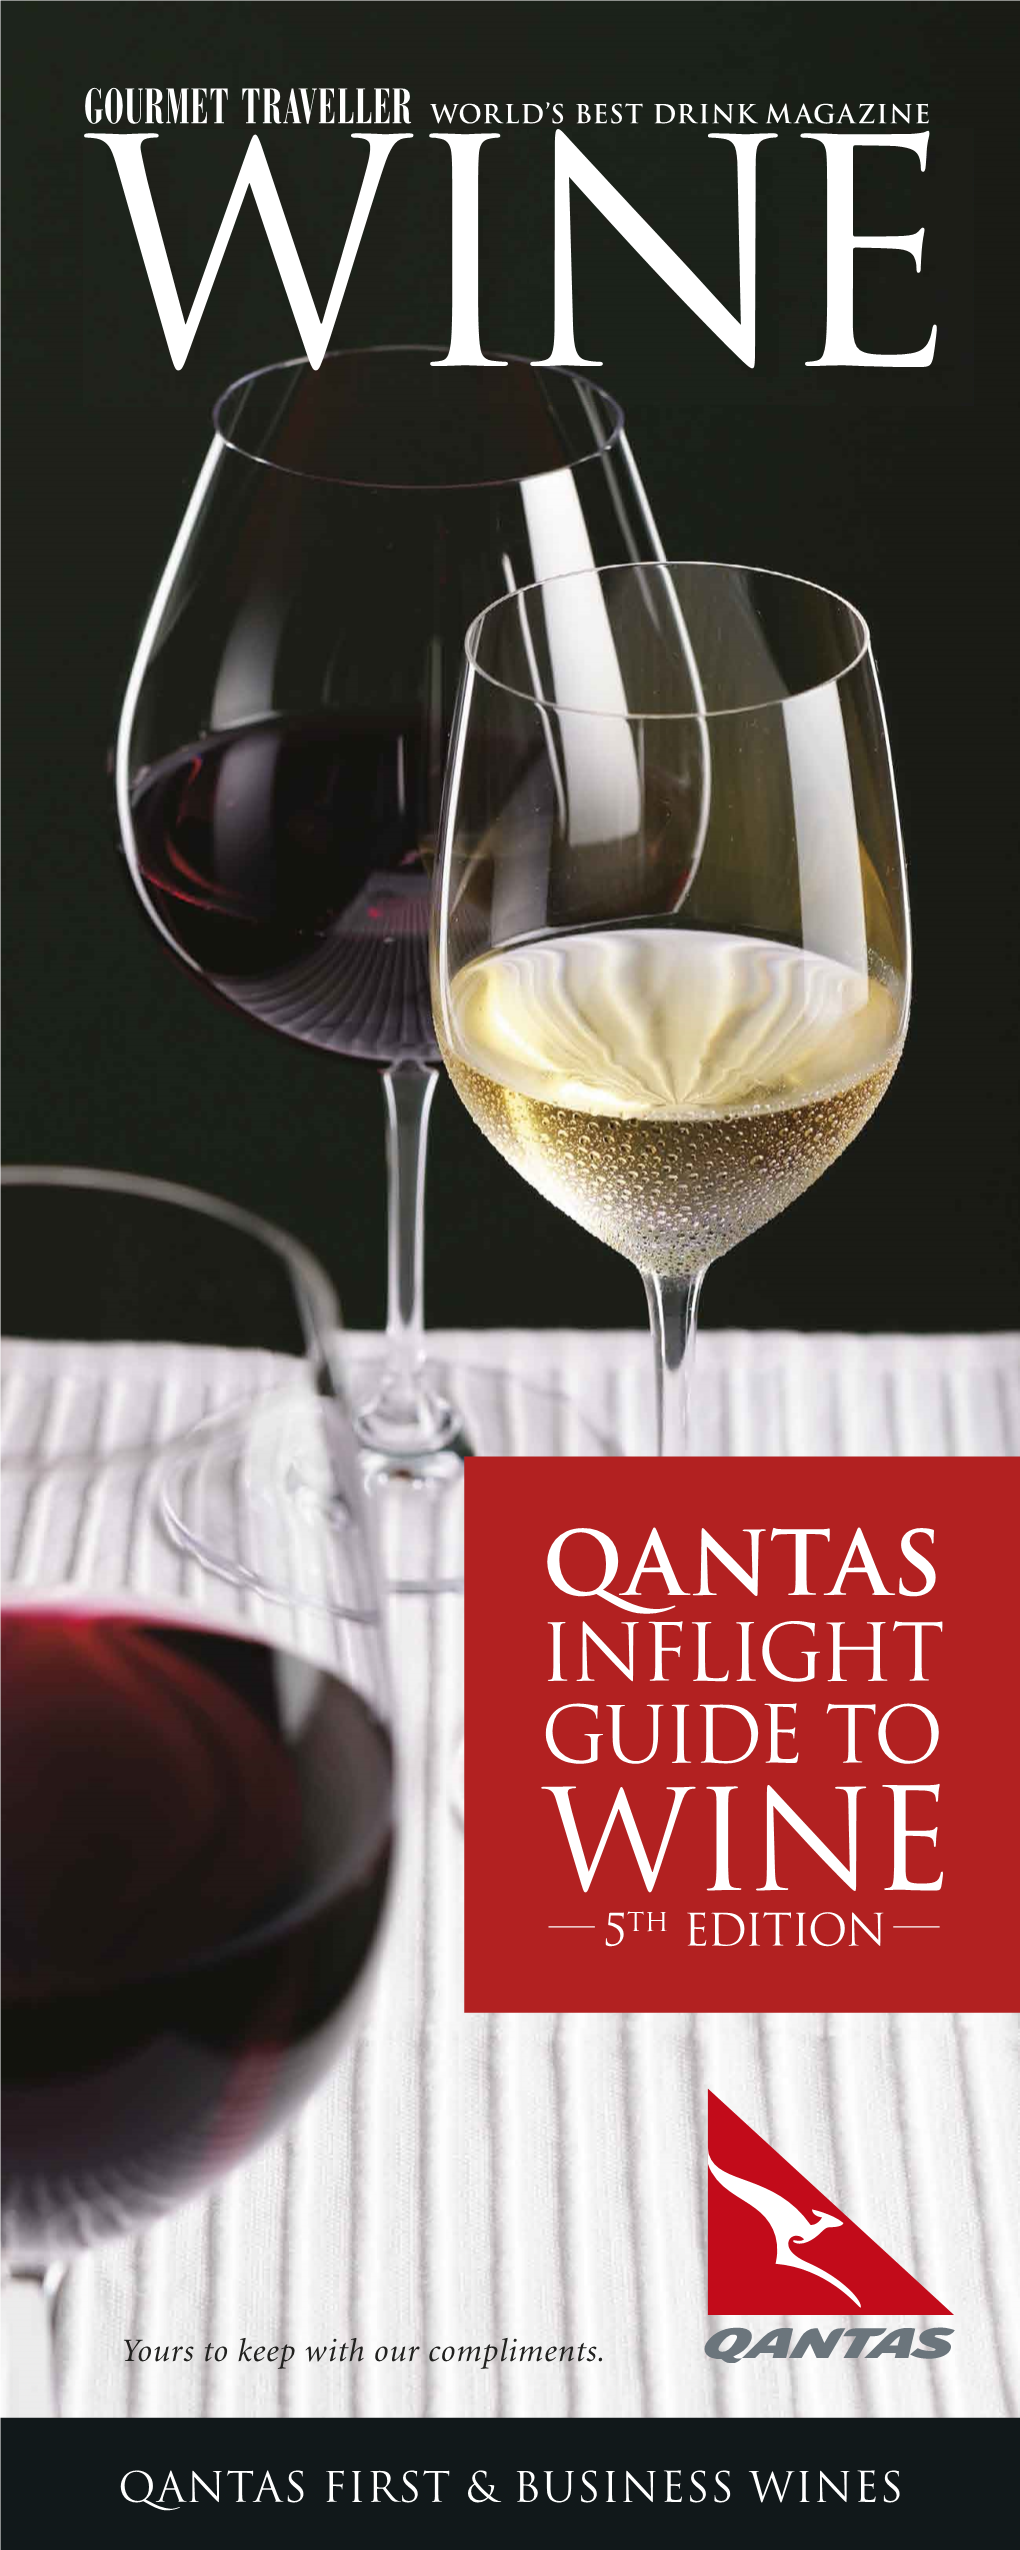 Inflight Guide to Wine 5Th Edition